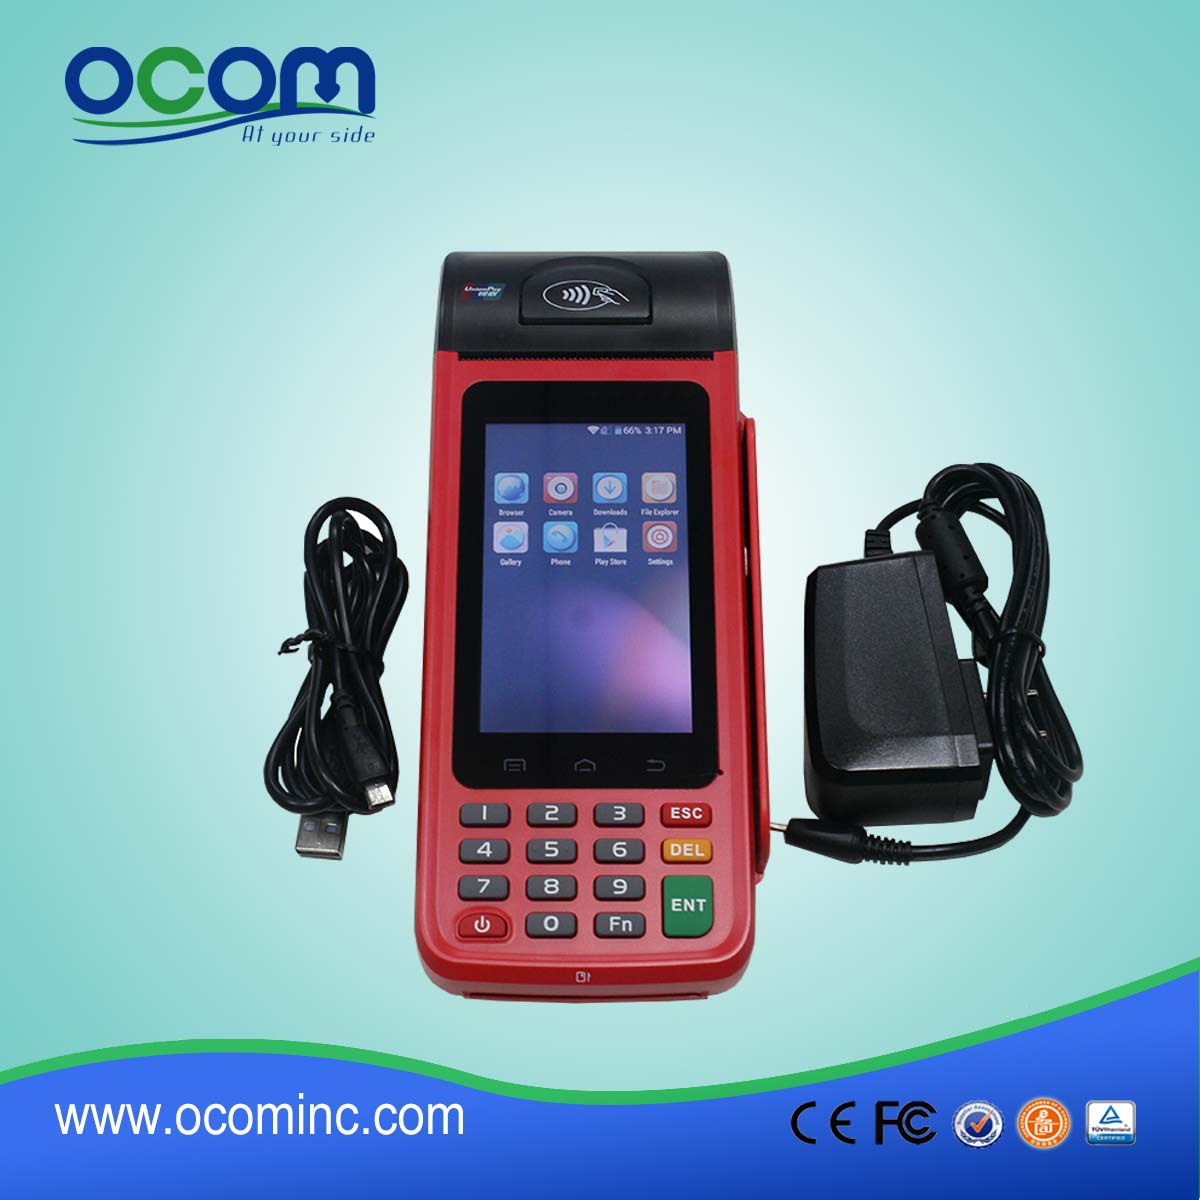 P8000 3G Mobile Android Handheld POS Imprimante avec GPRS